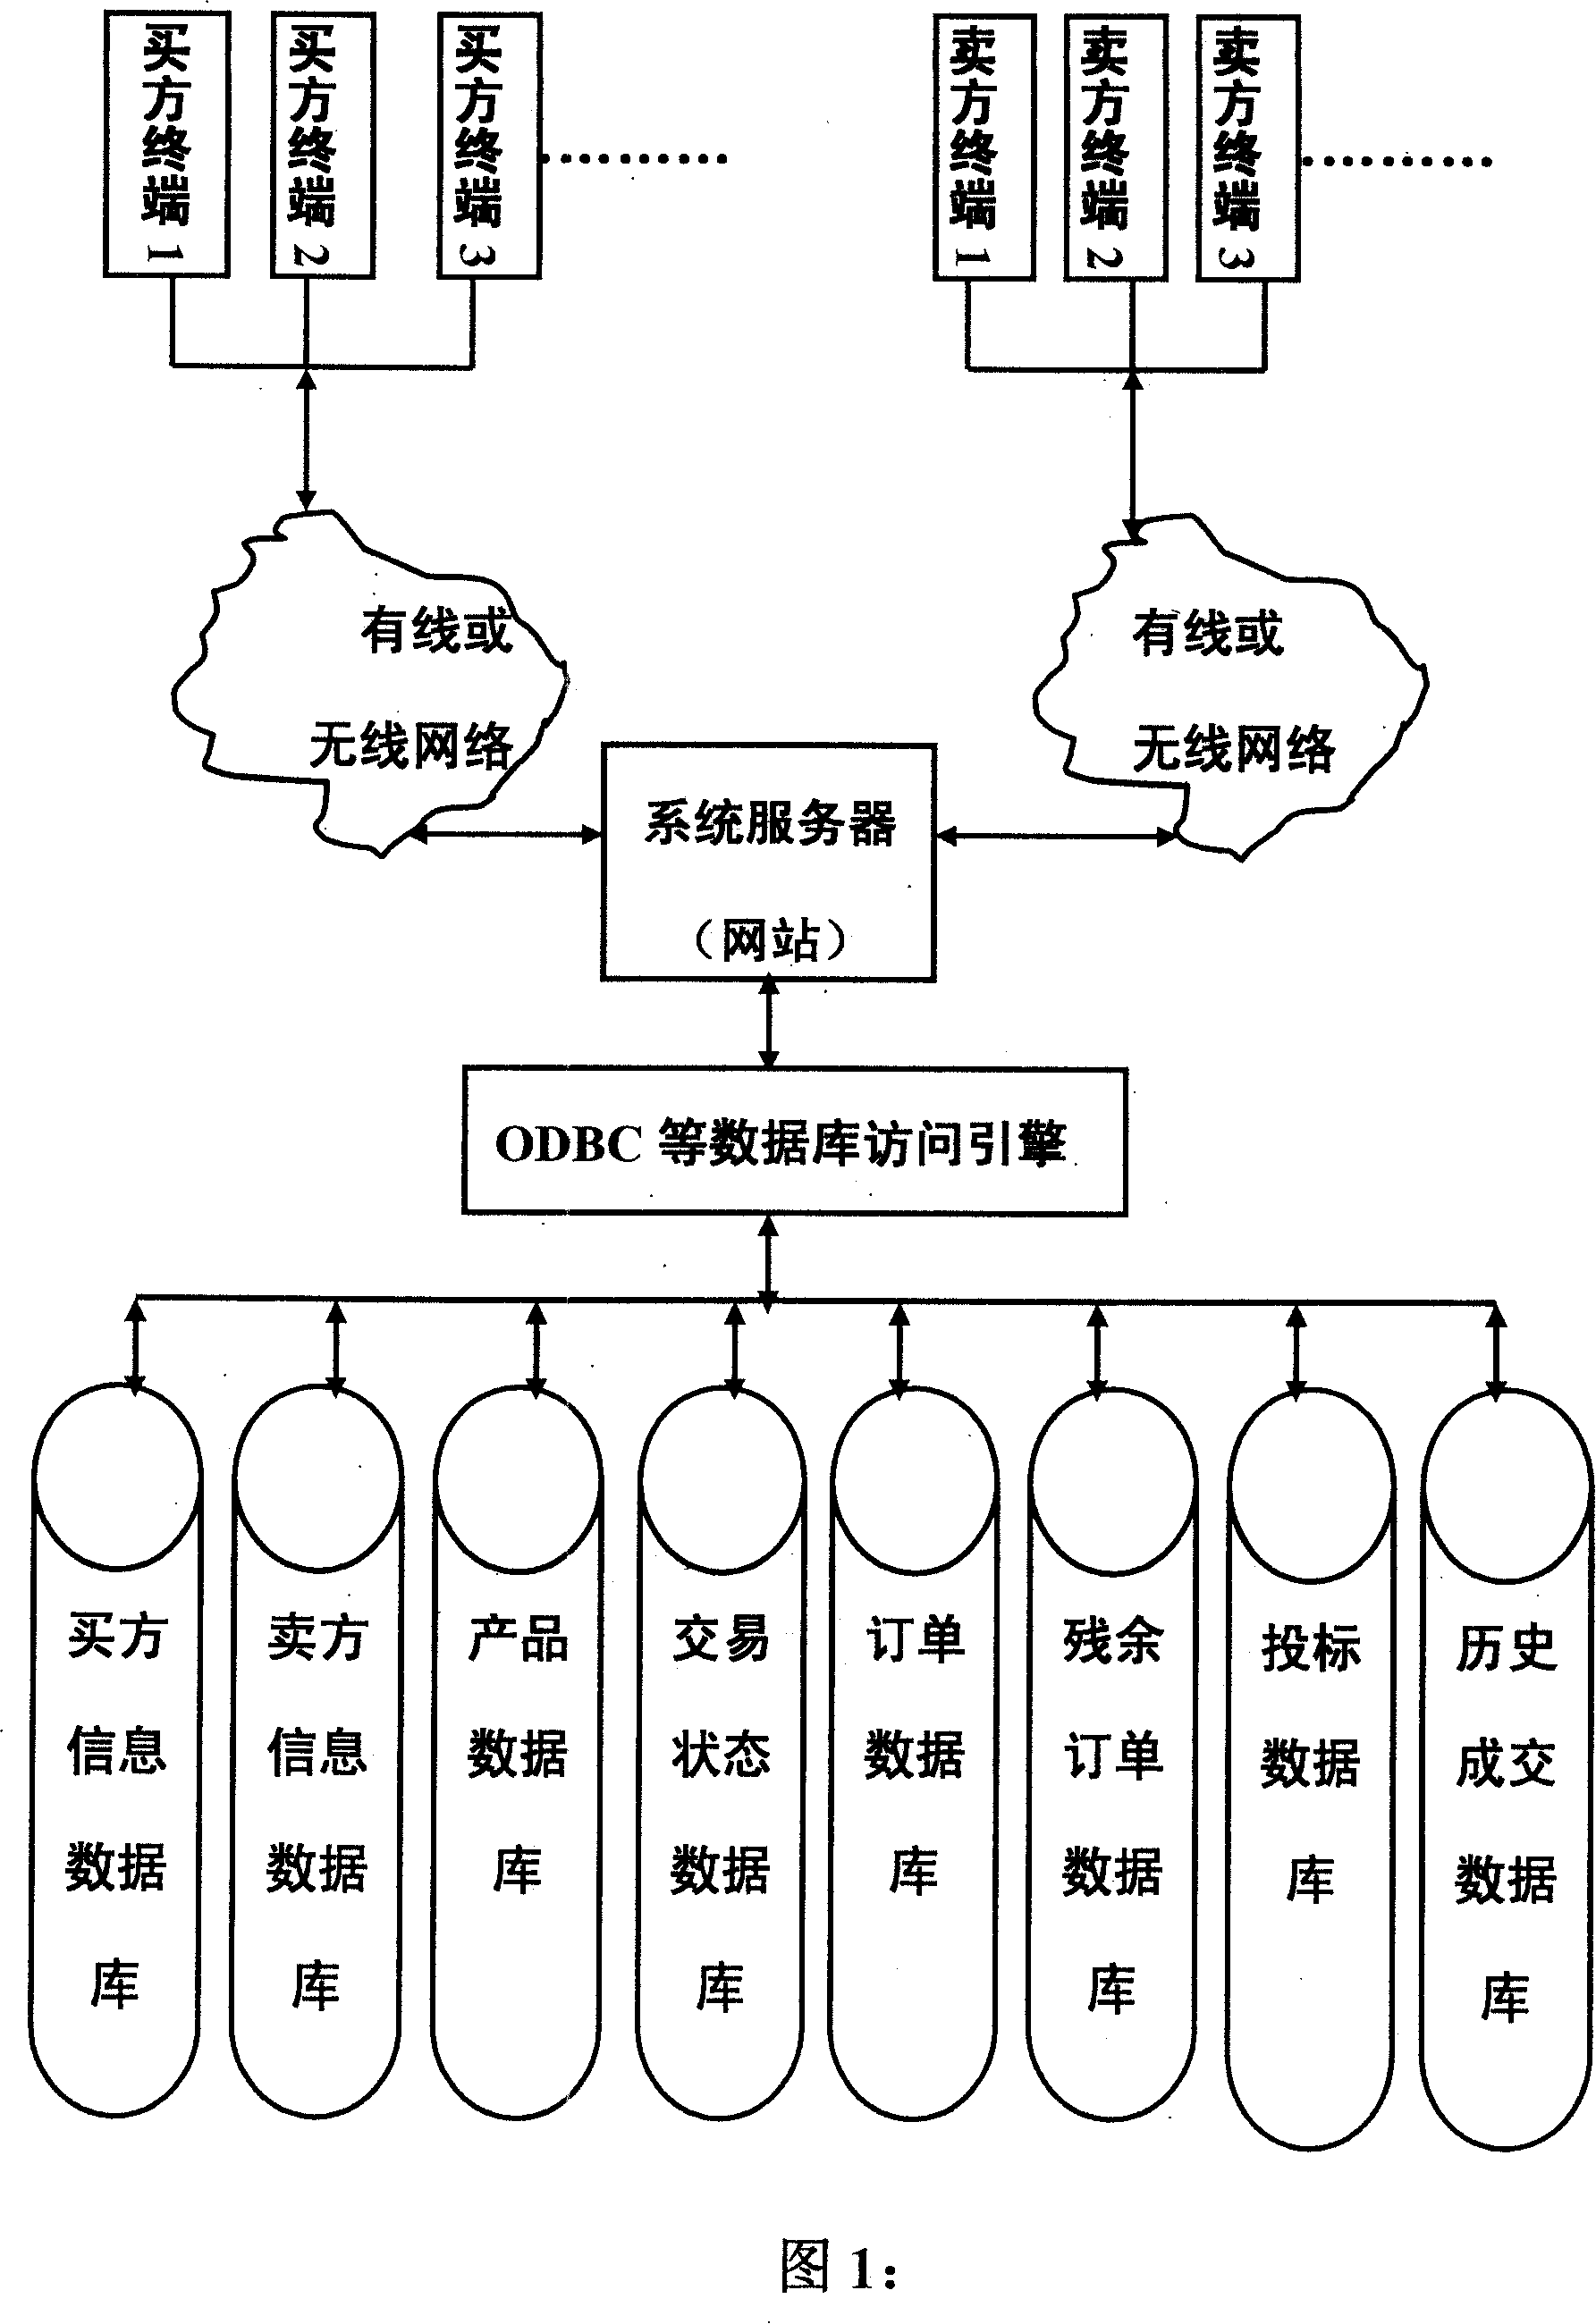 Commodity transaction mode under information network surroundings